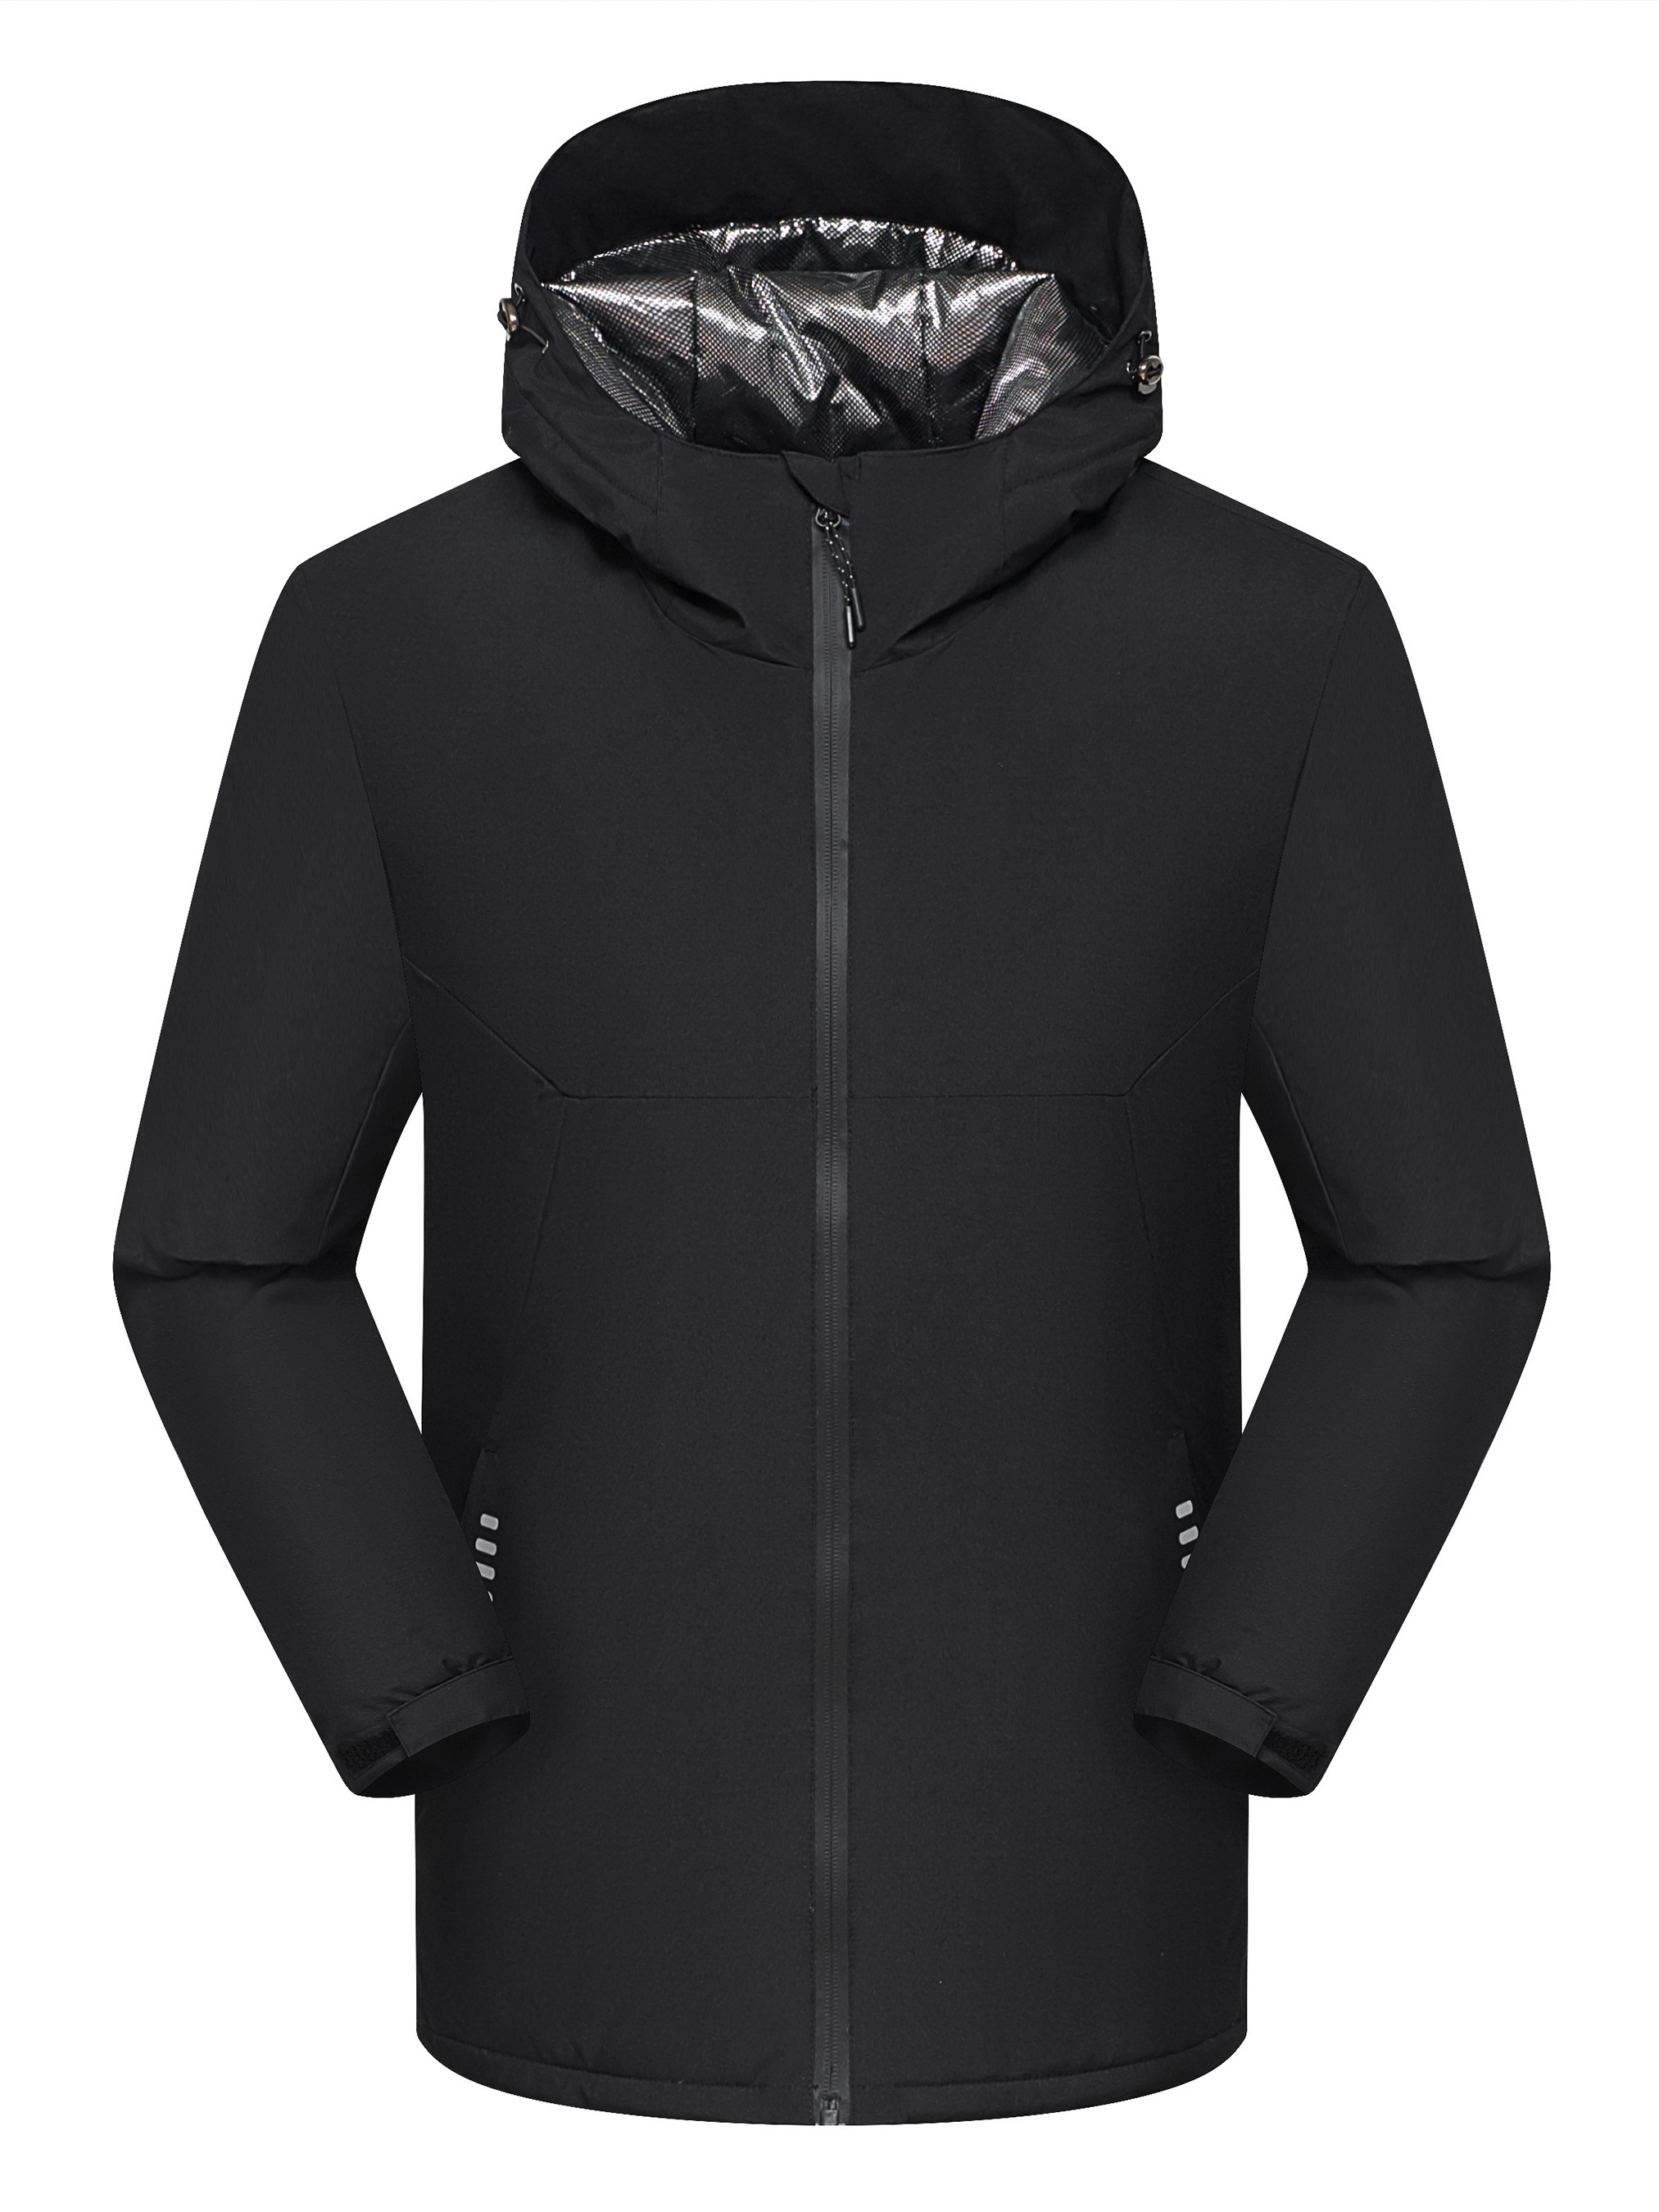 Zip Up Hoodie,Flannel Warm Fleece Lined Mens Jacket Full Zip Colorblock  Casual Jackets Going Out Sports Winter Coats